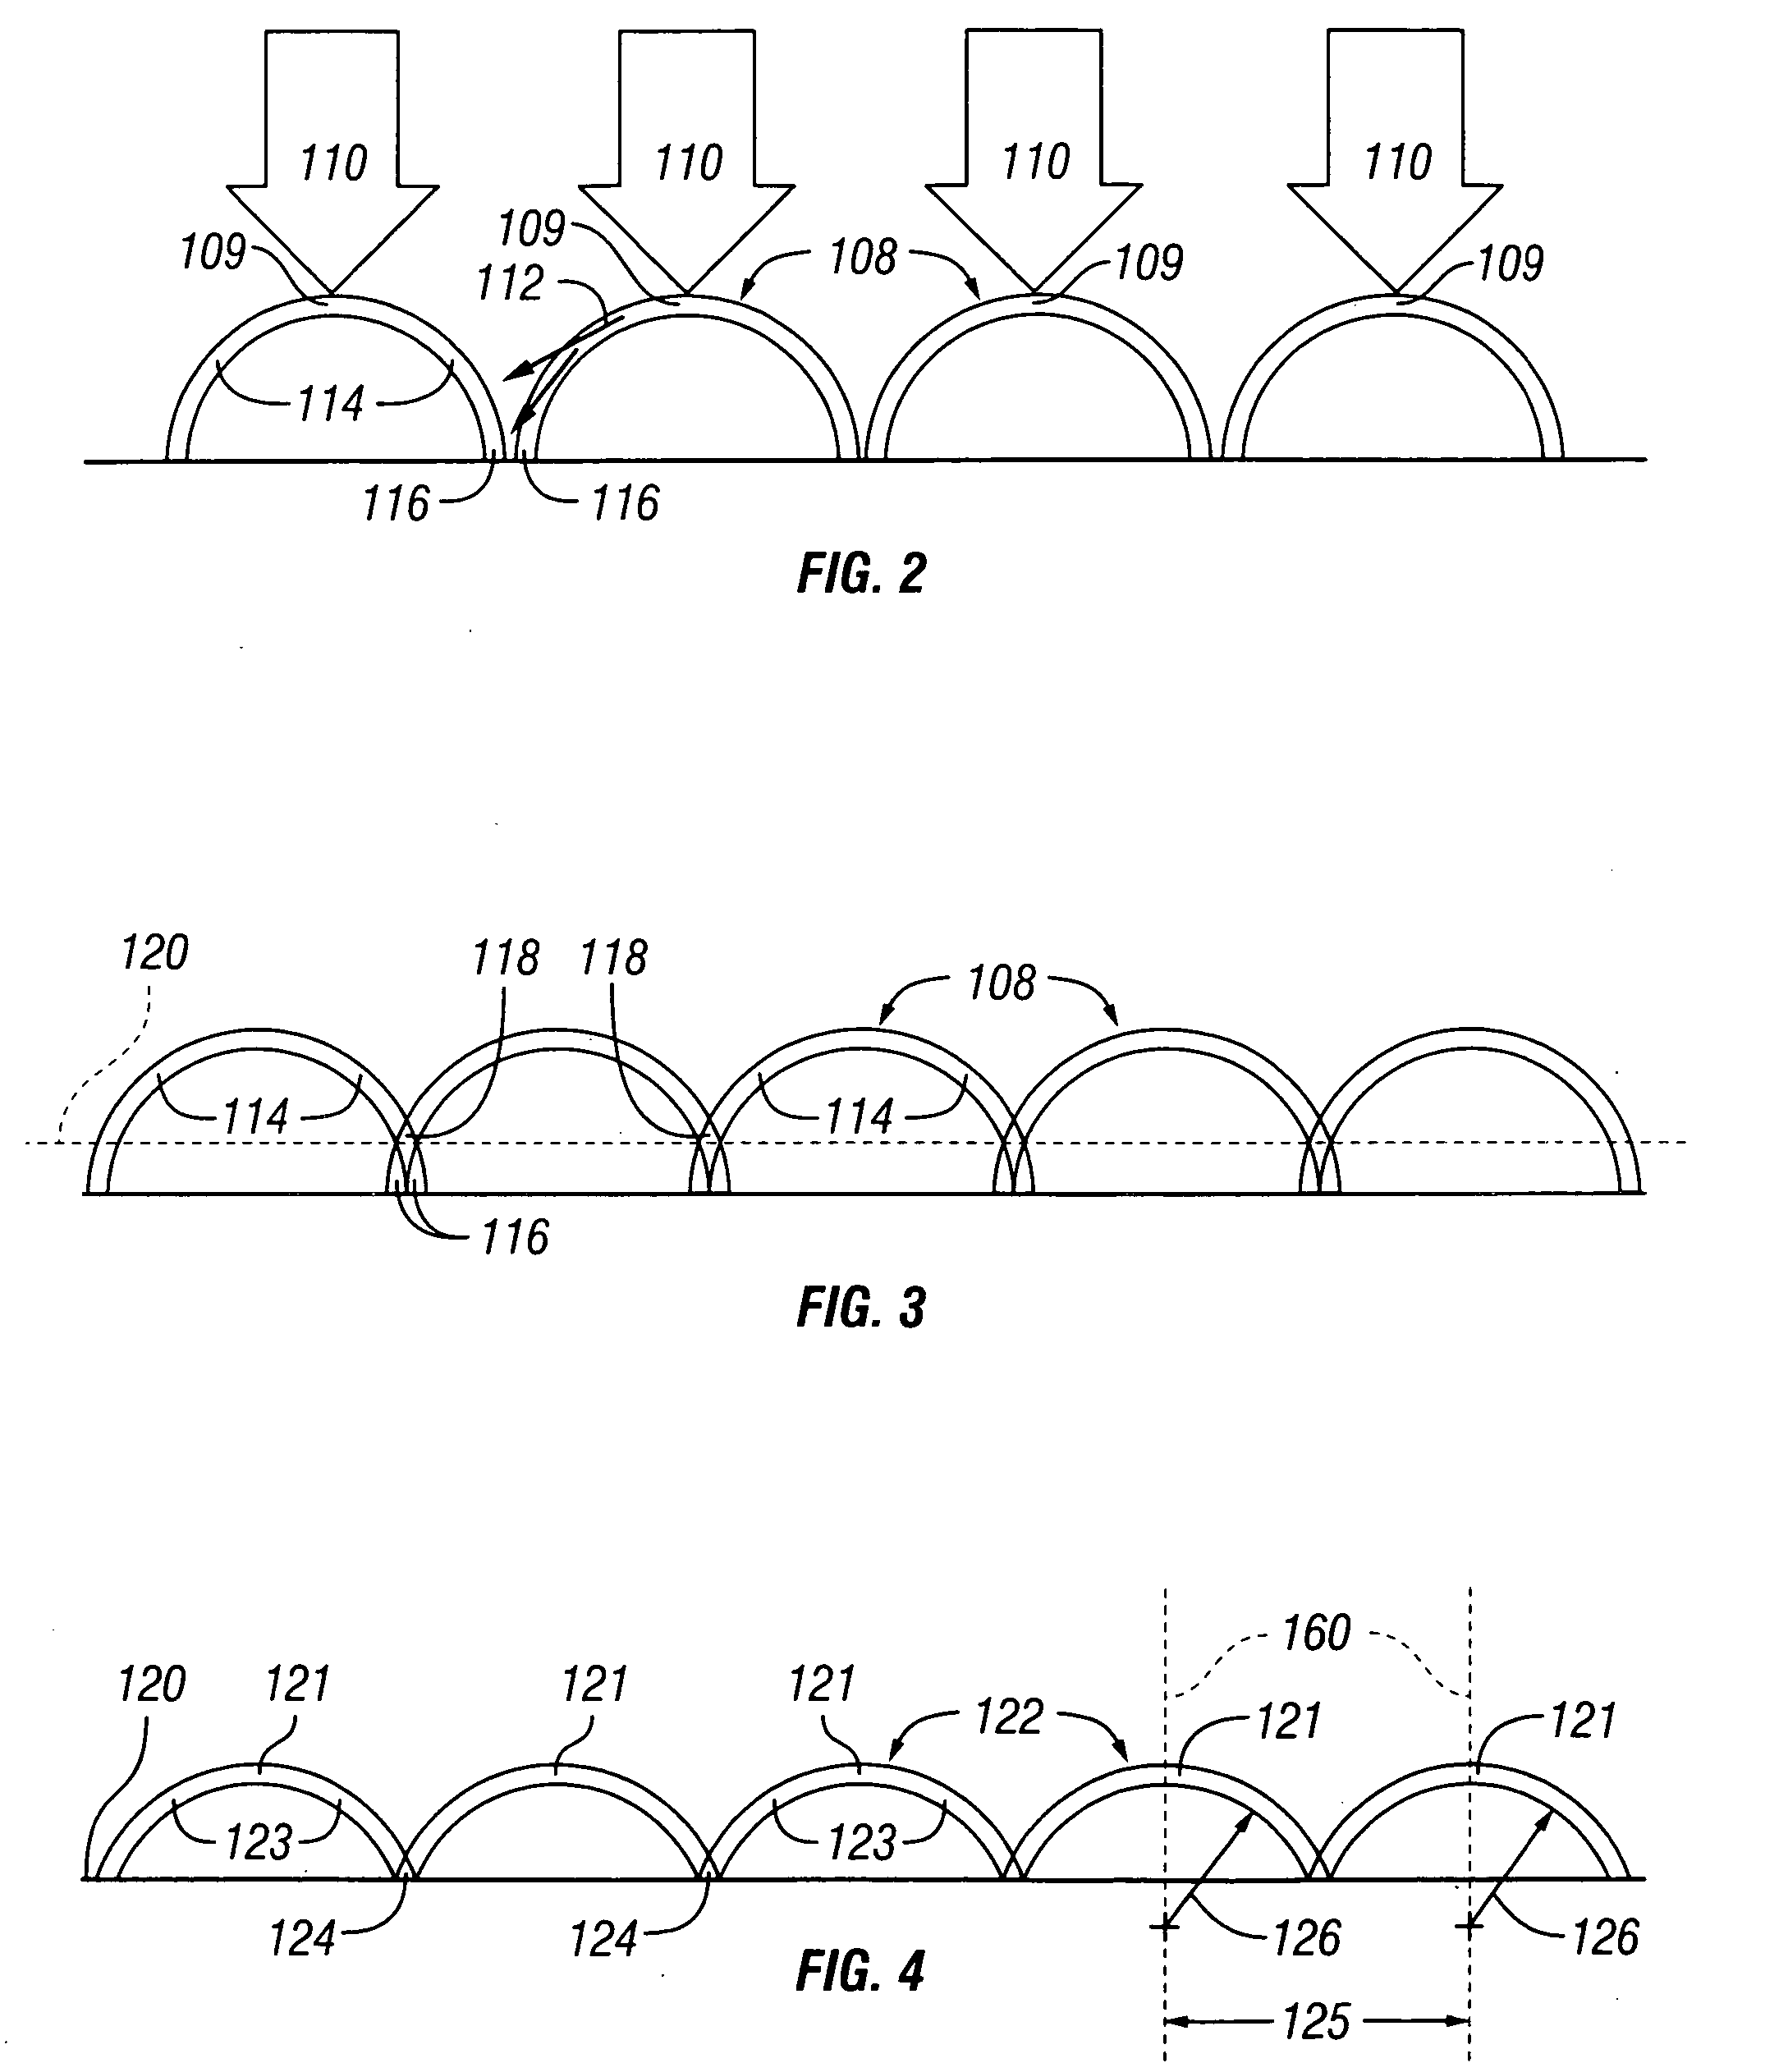 Rackable composite shipping pallet for transporting and storing loads